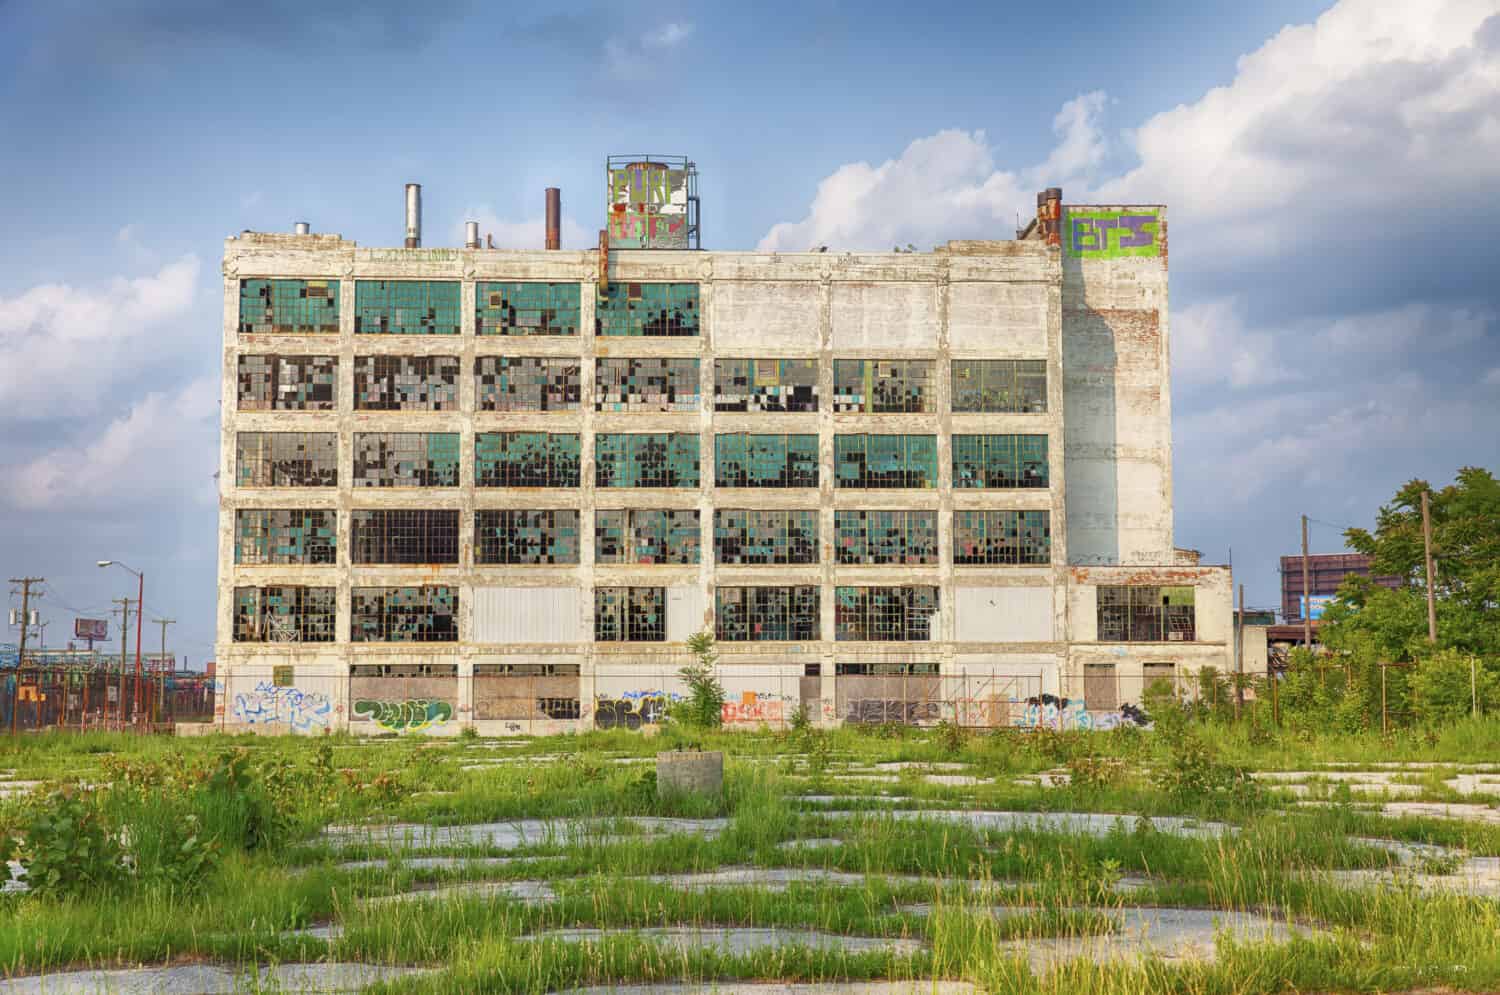 An old factory  in the Highland Park area shows the post-industrial plight of Detroit with broken windows and a parking lot filled with weeds. 